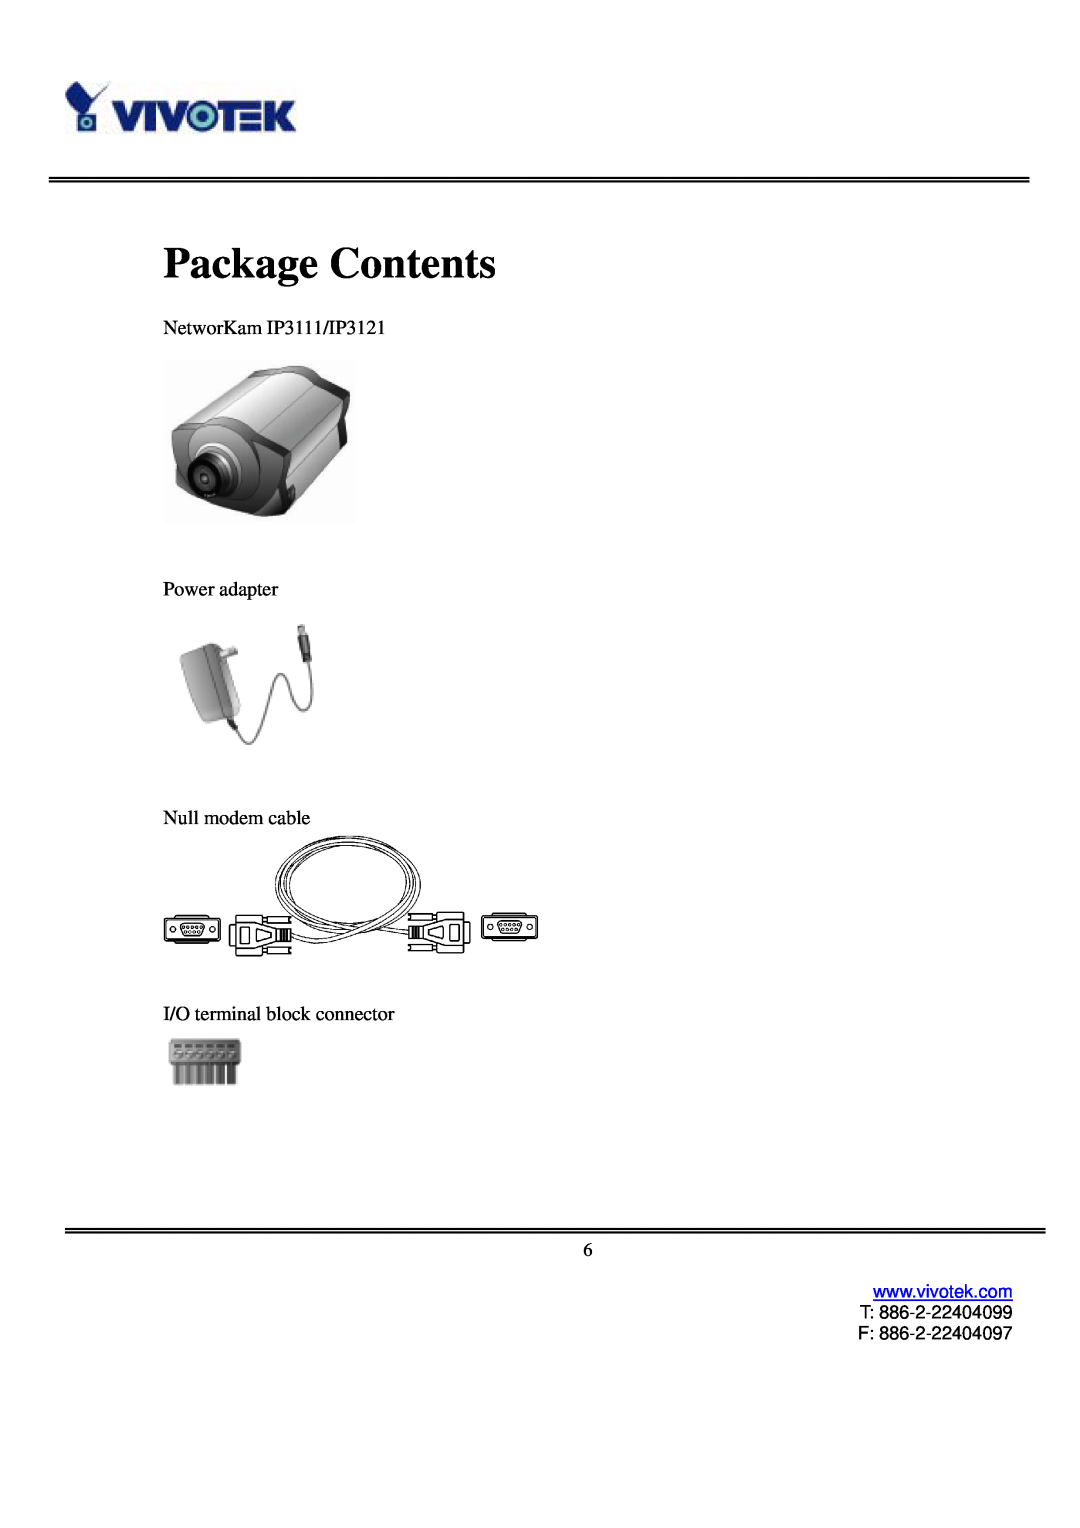 Vivotek Package Contents, NetworKam IP3111/IP3121 Power adapter Null modem cable, I/O terminal block connector 